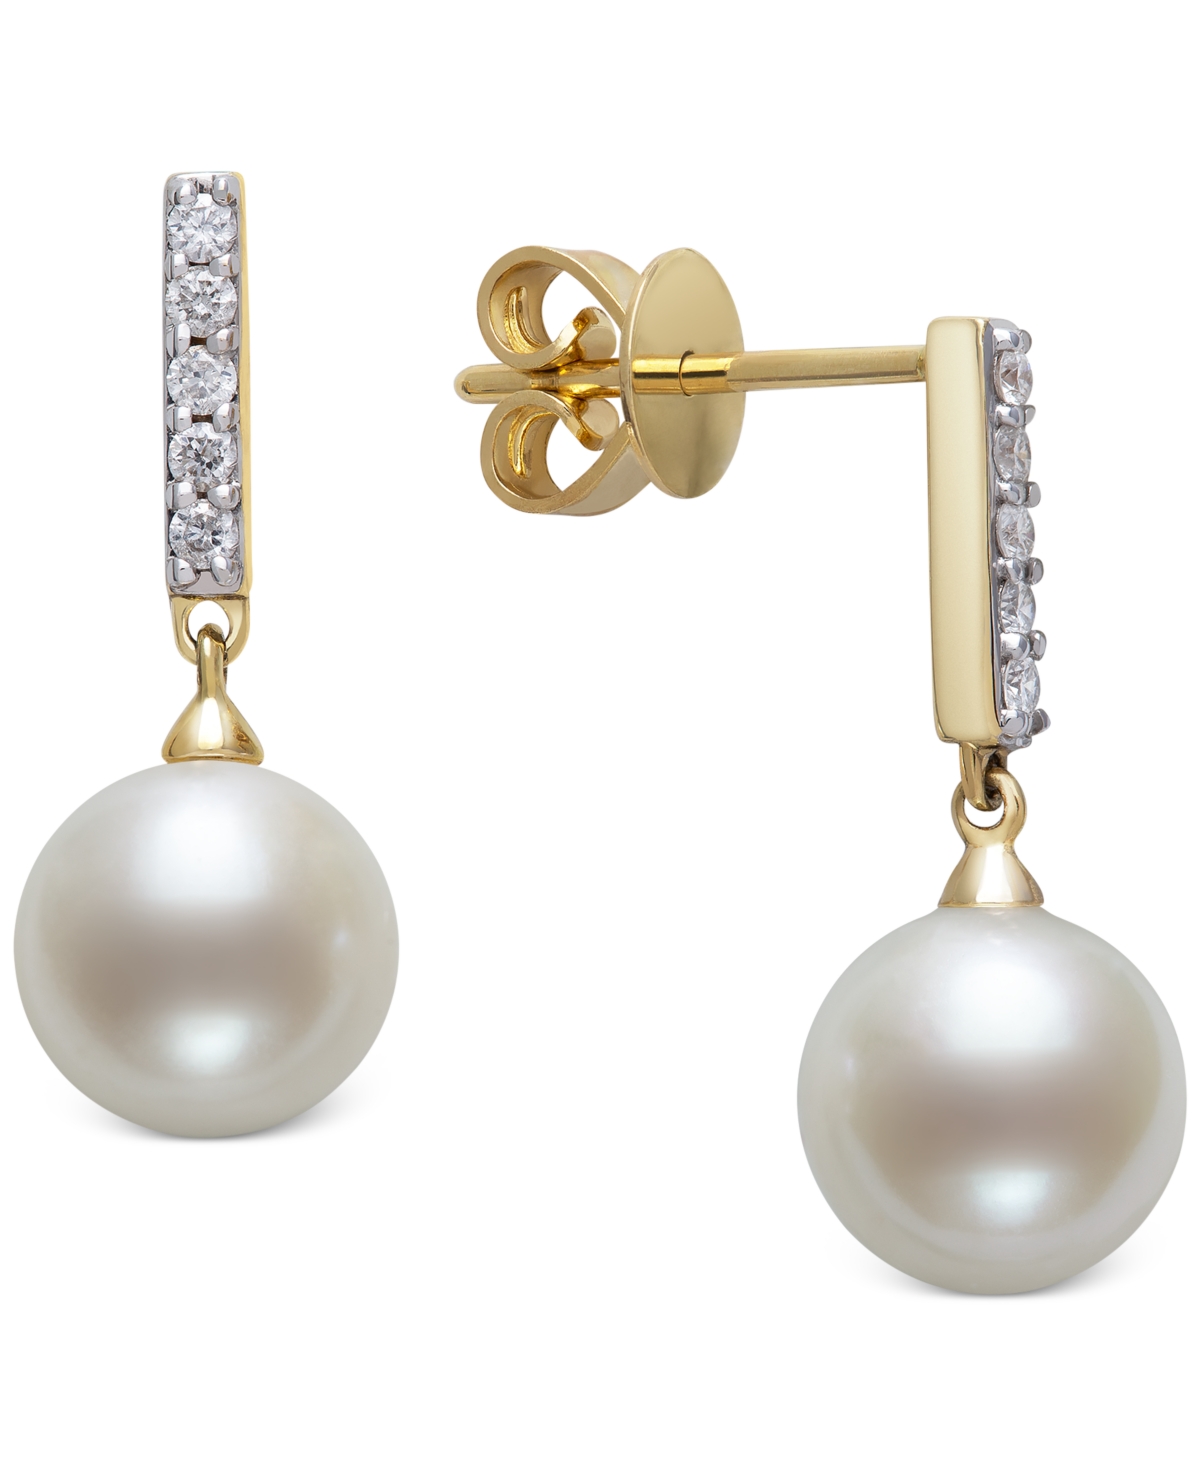 Cultured Freshwater Pearl (8mm) & Diamond (1/6 ct. t.w.) Drop Earrings in 14k Gold, Created for Macy's - Gold